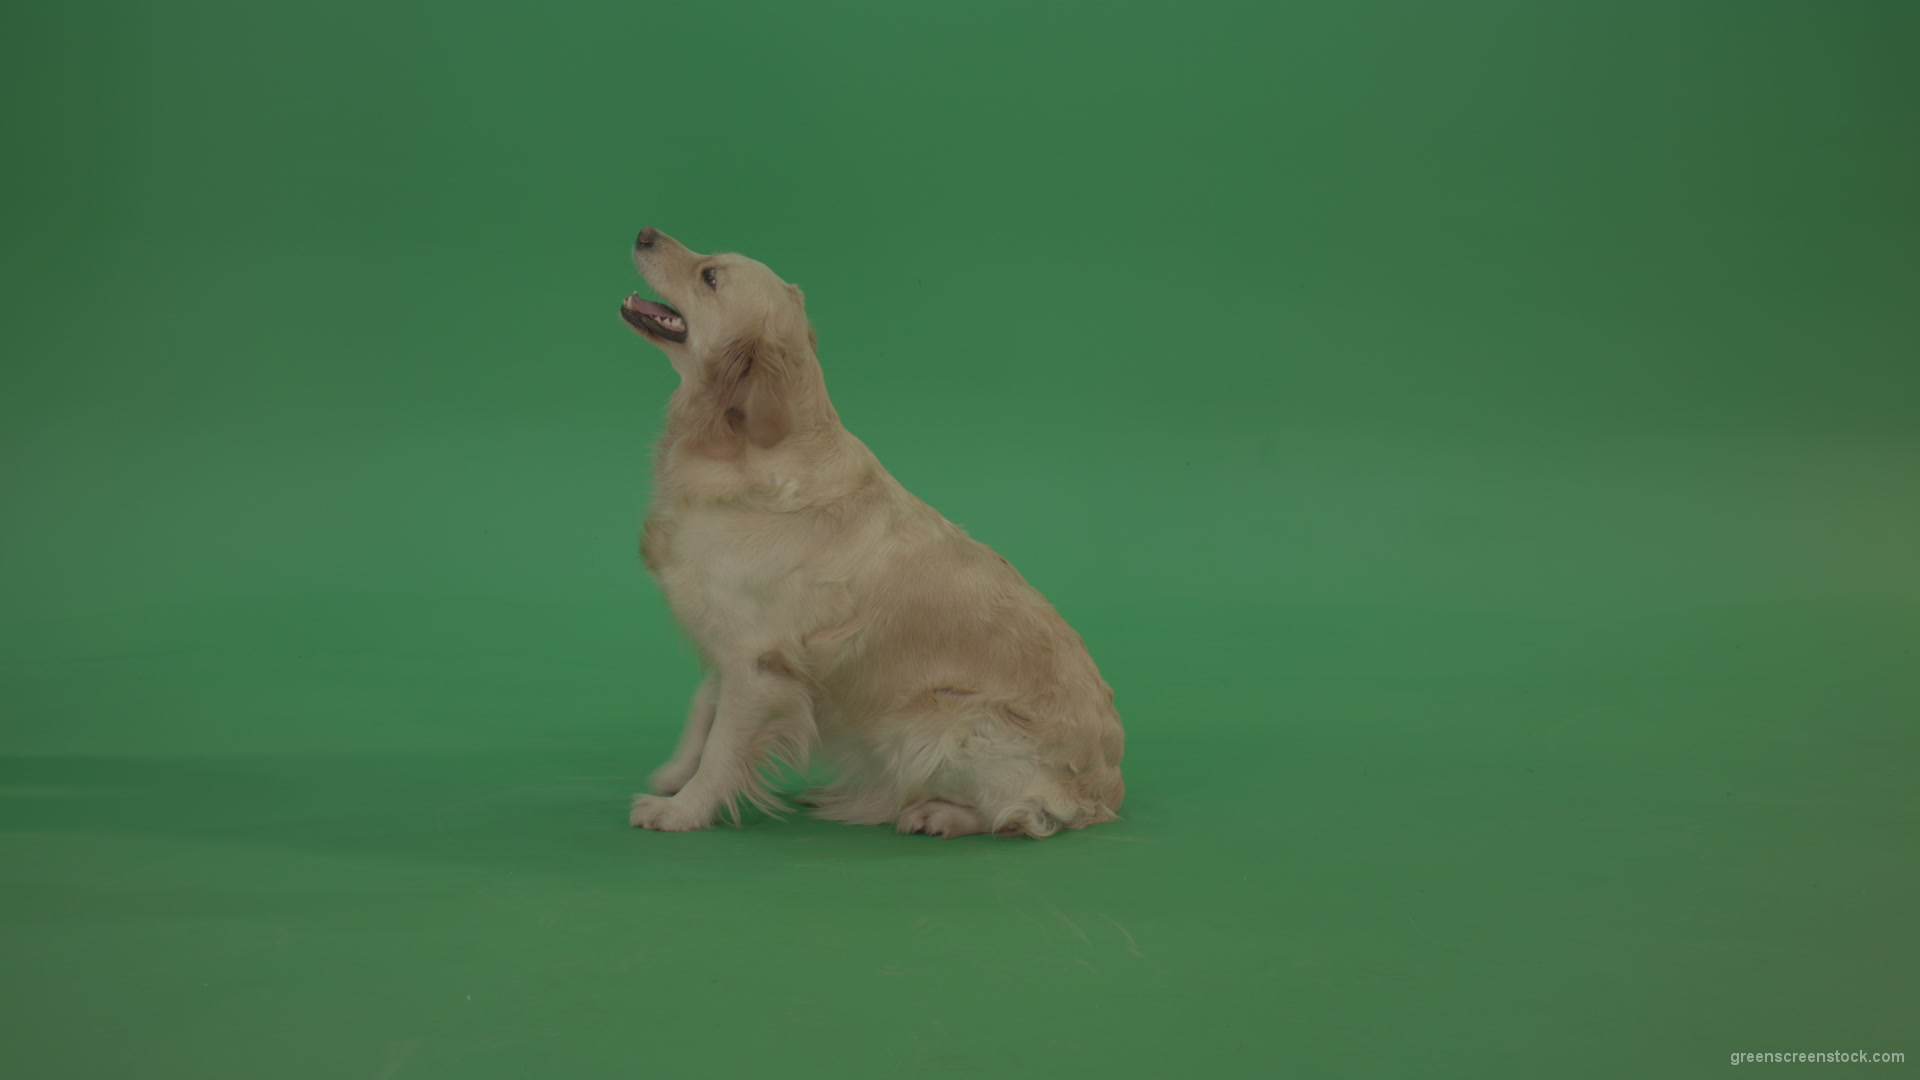 Golden-Retriever-green-screen-dog-in-side-view-barking-isolated-on-chromakey-green-background_009 Green Screen Stock